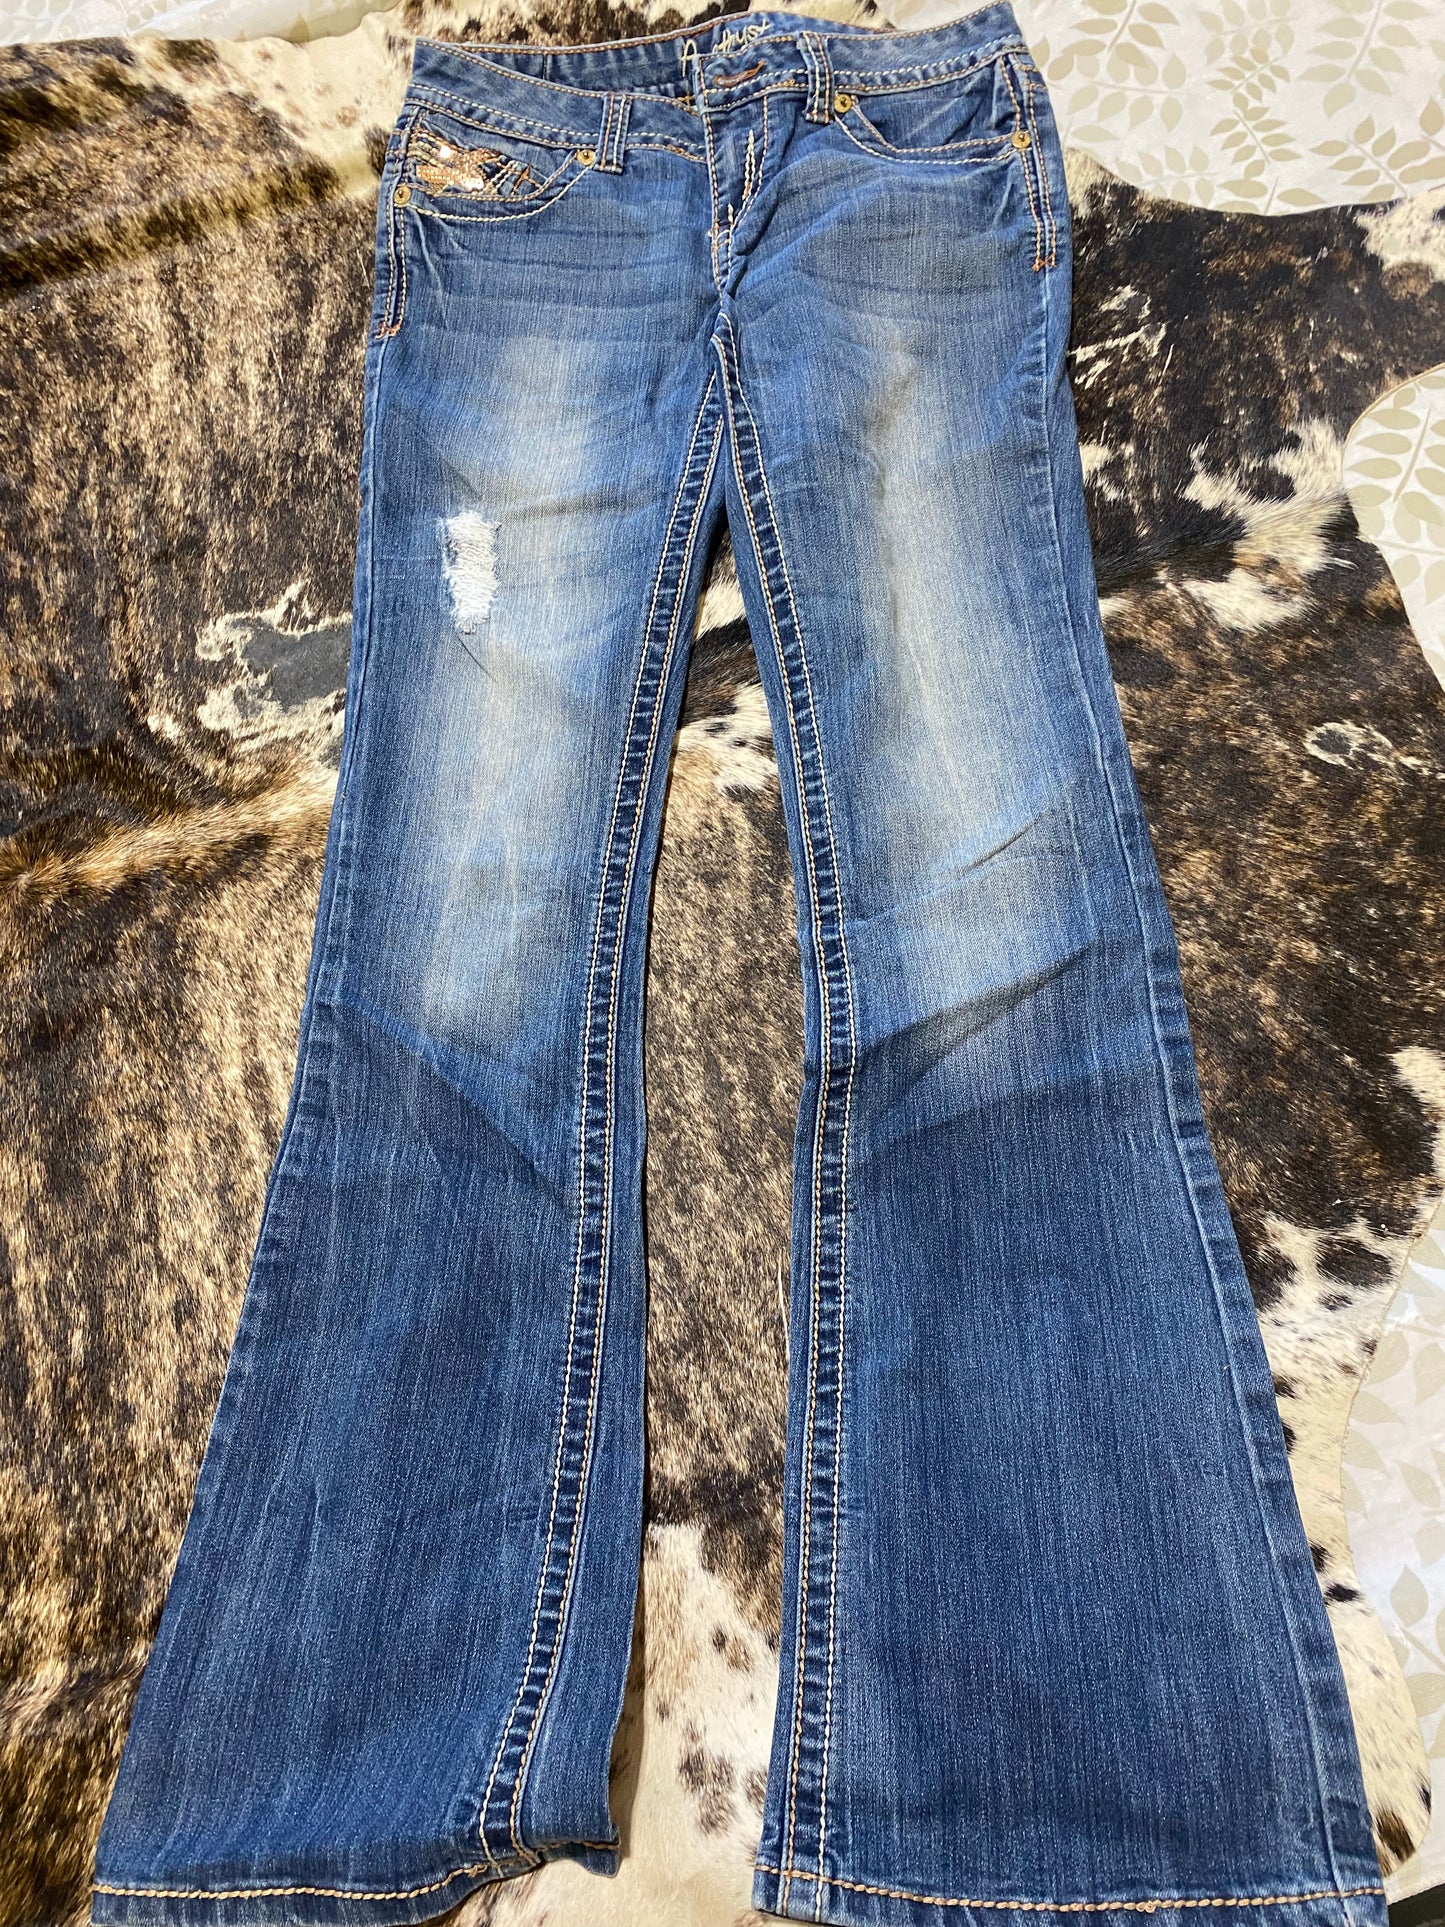 Amethyst Consignment Jeans